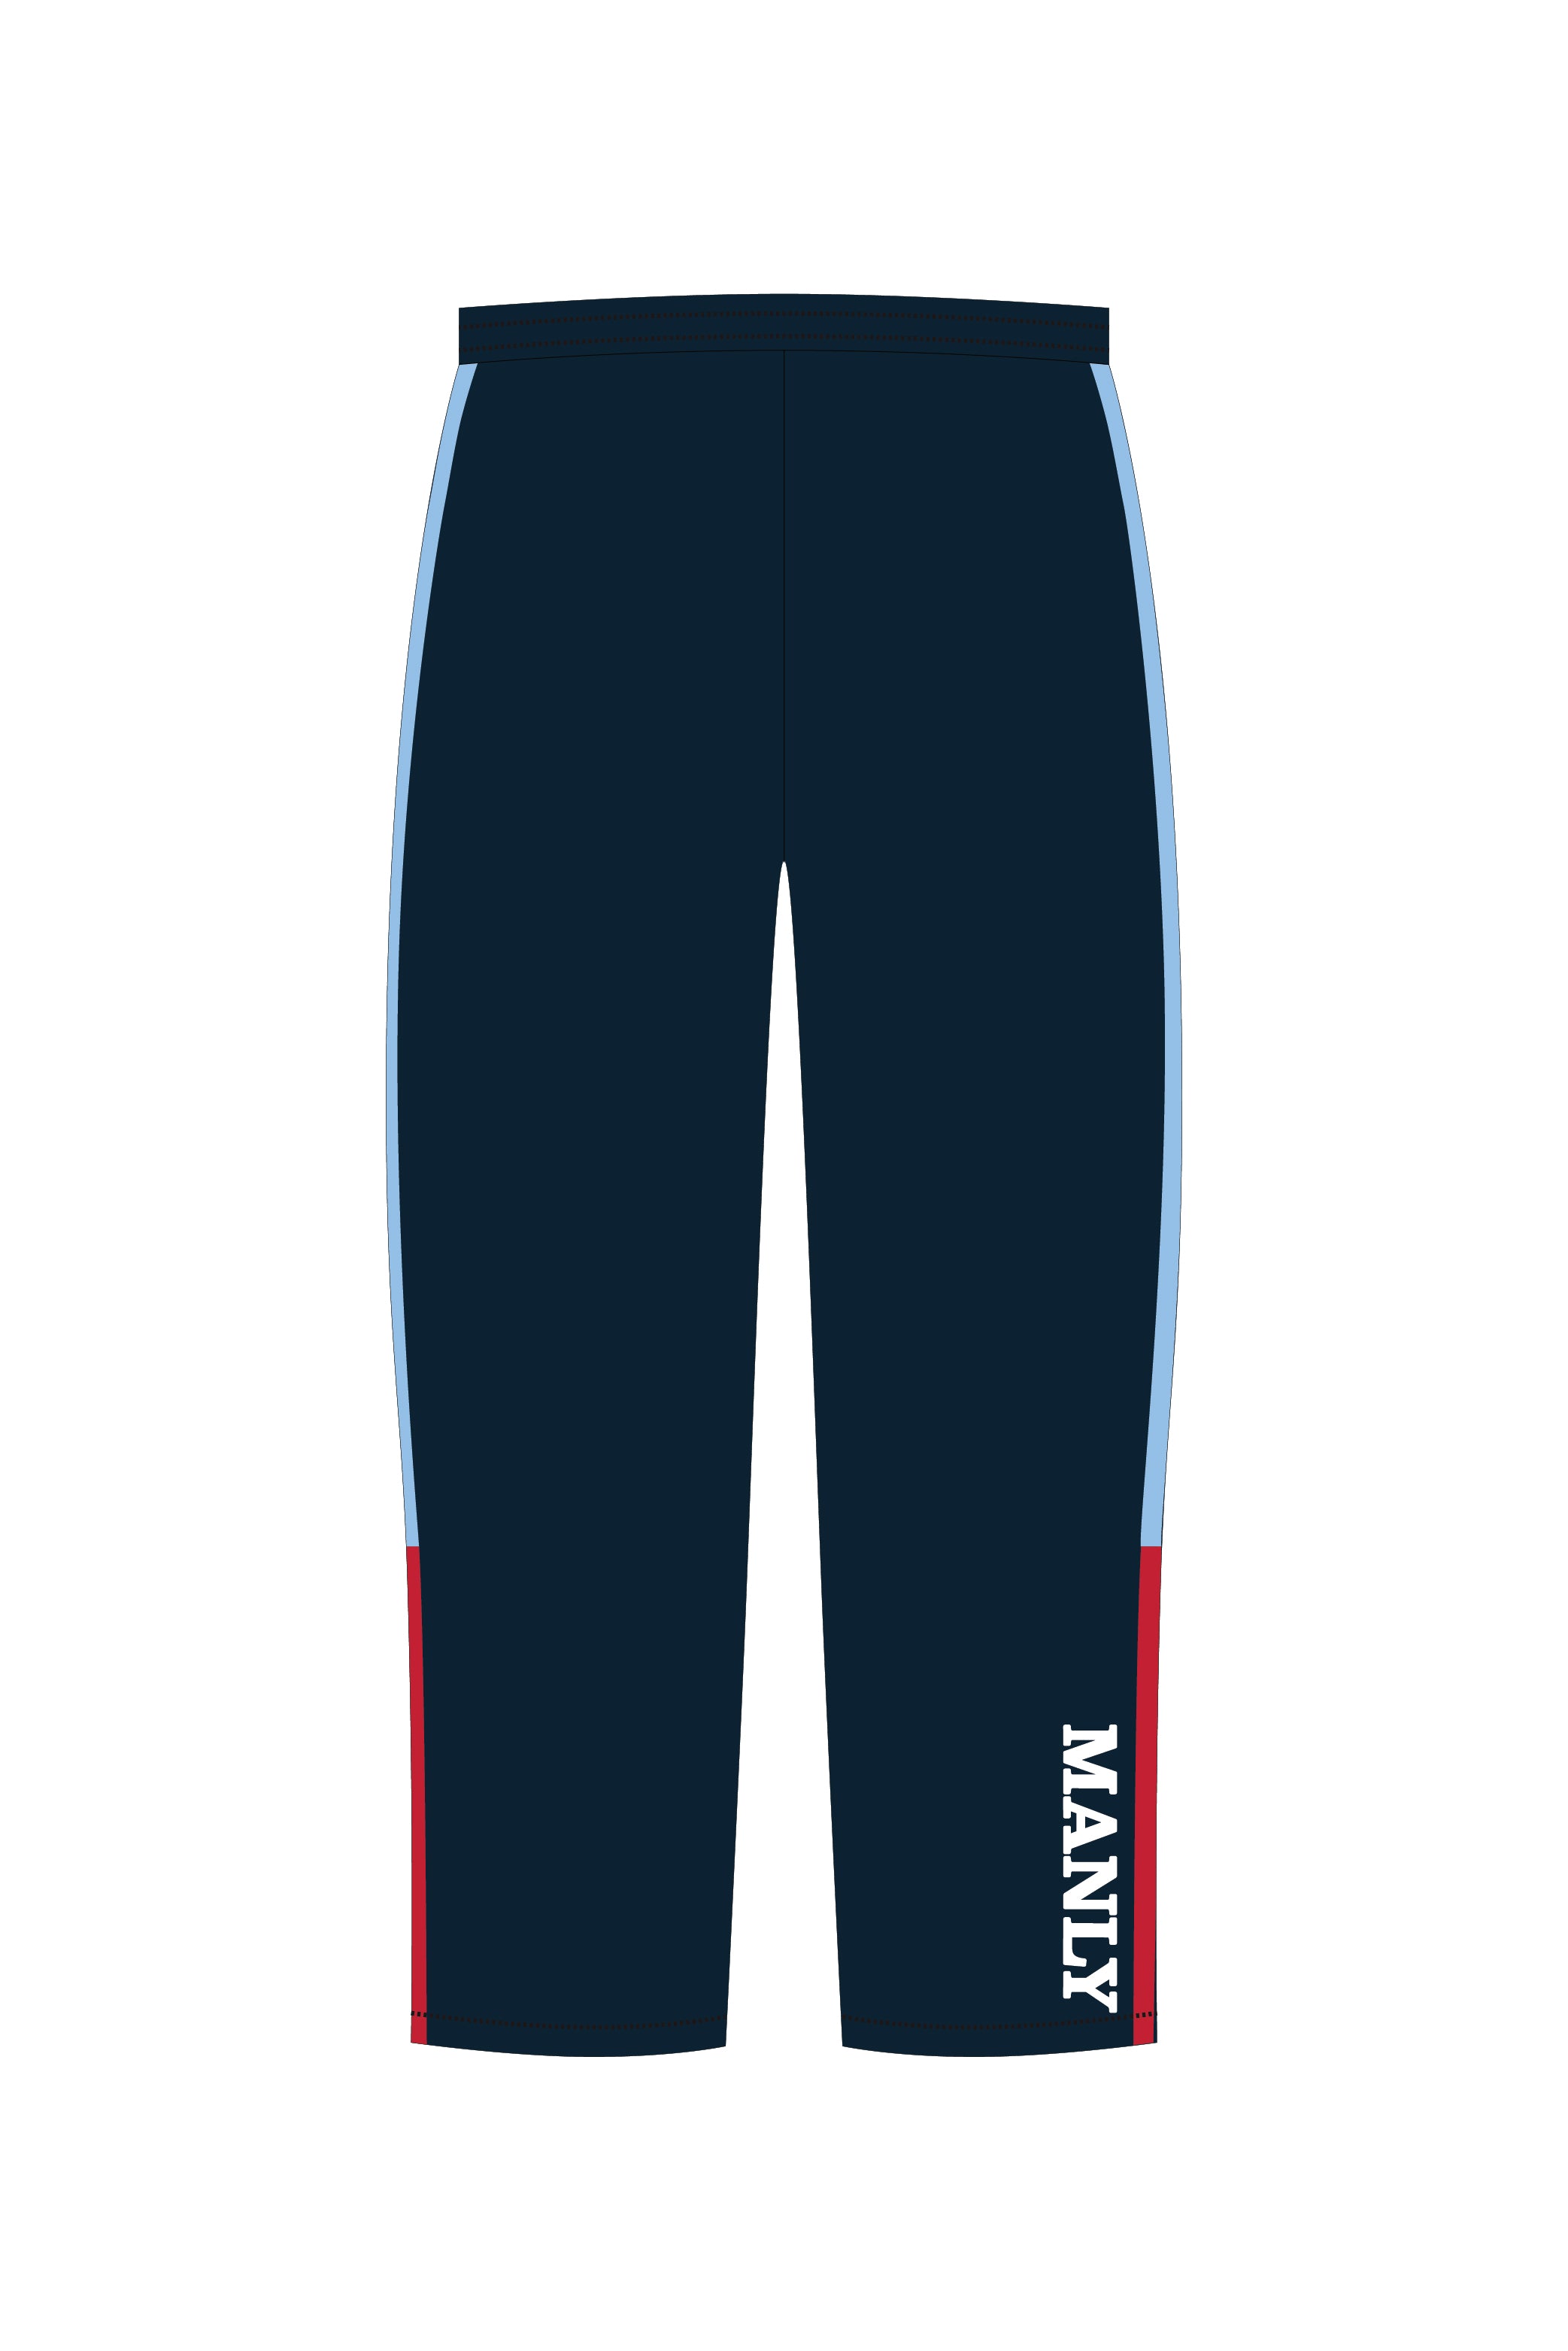 Manly Swimming Club Tracksuit Kid's Pants